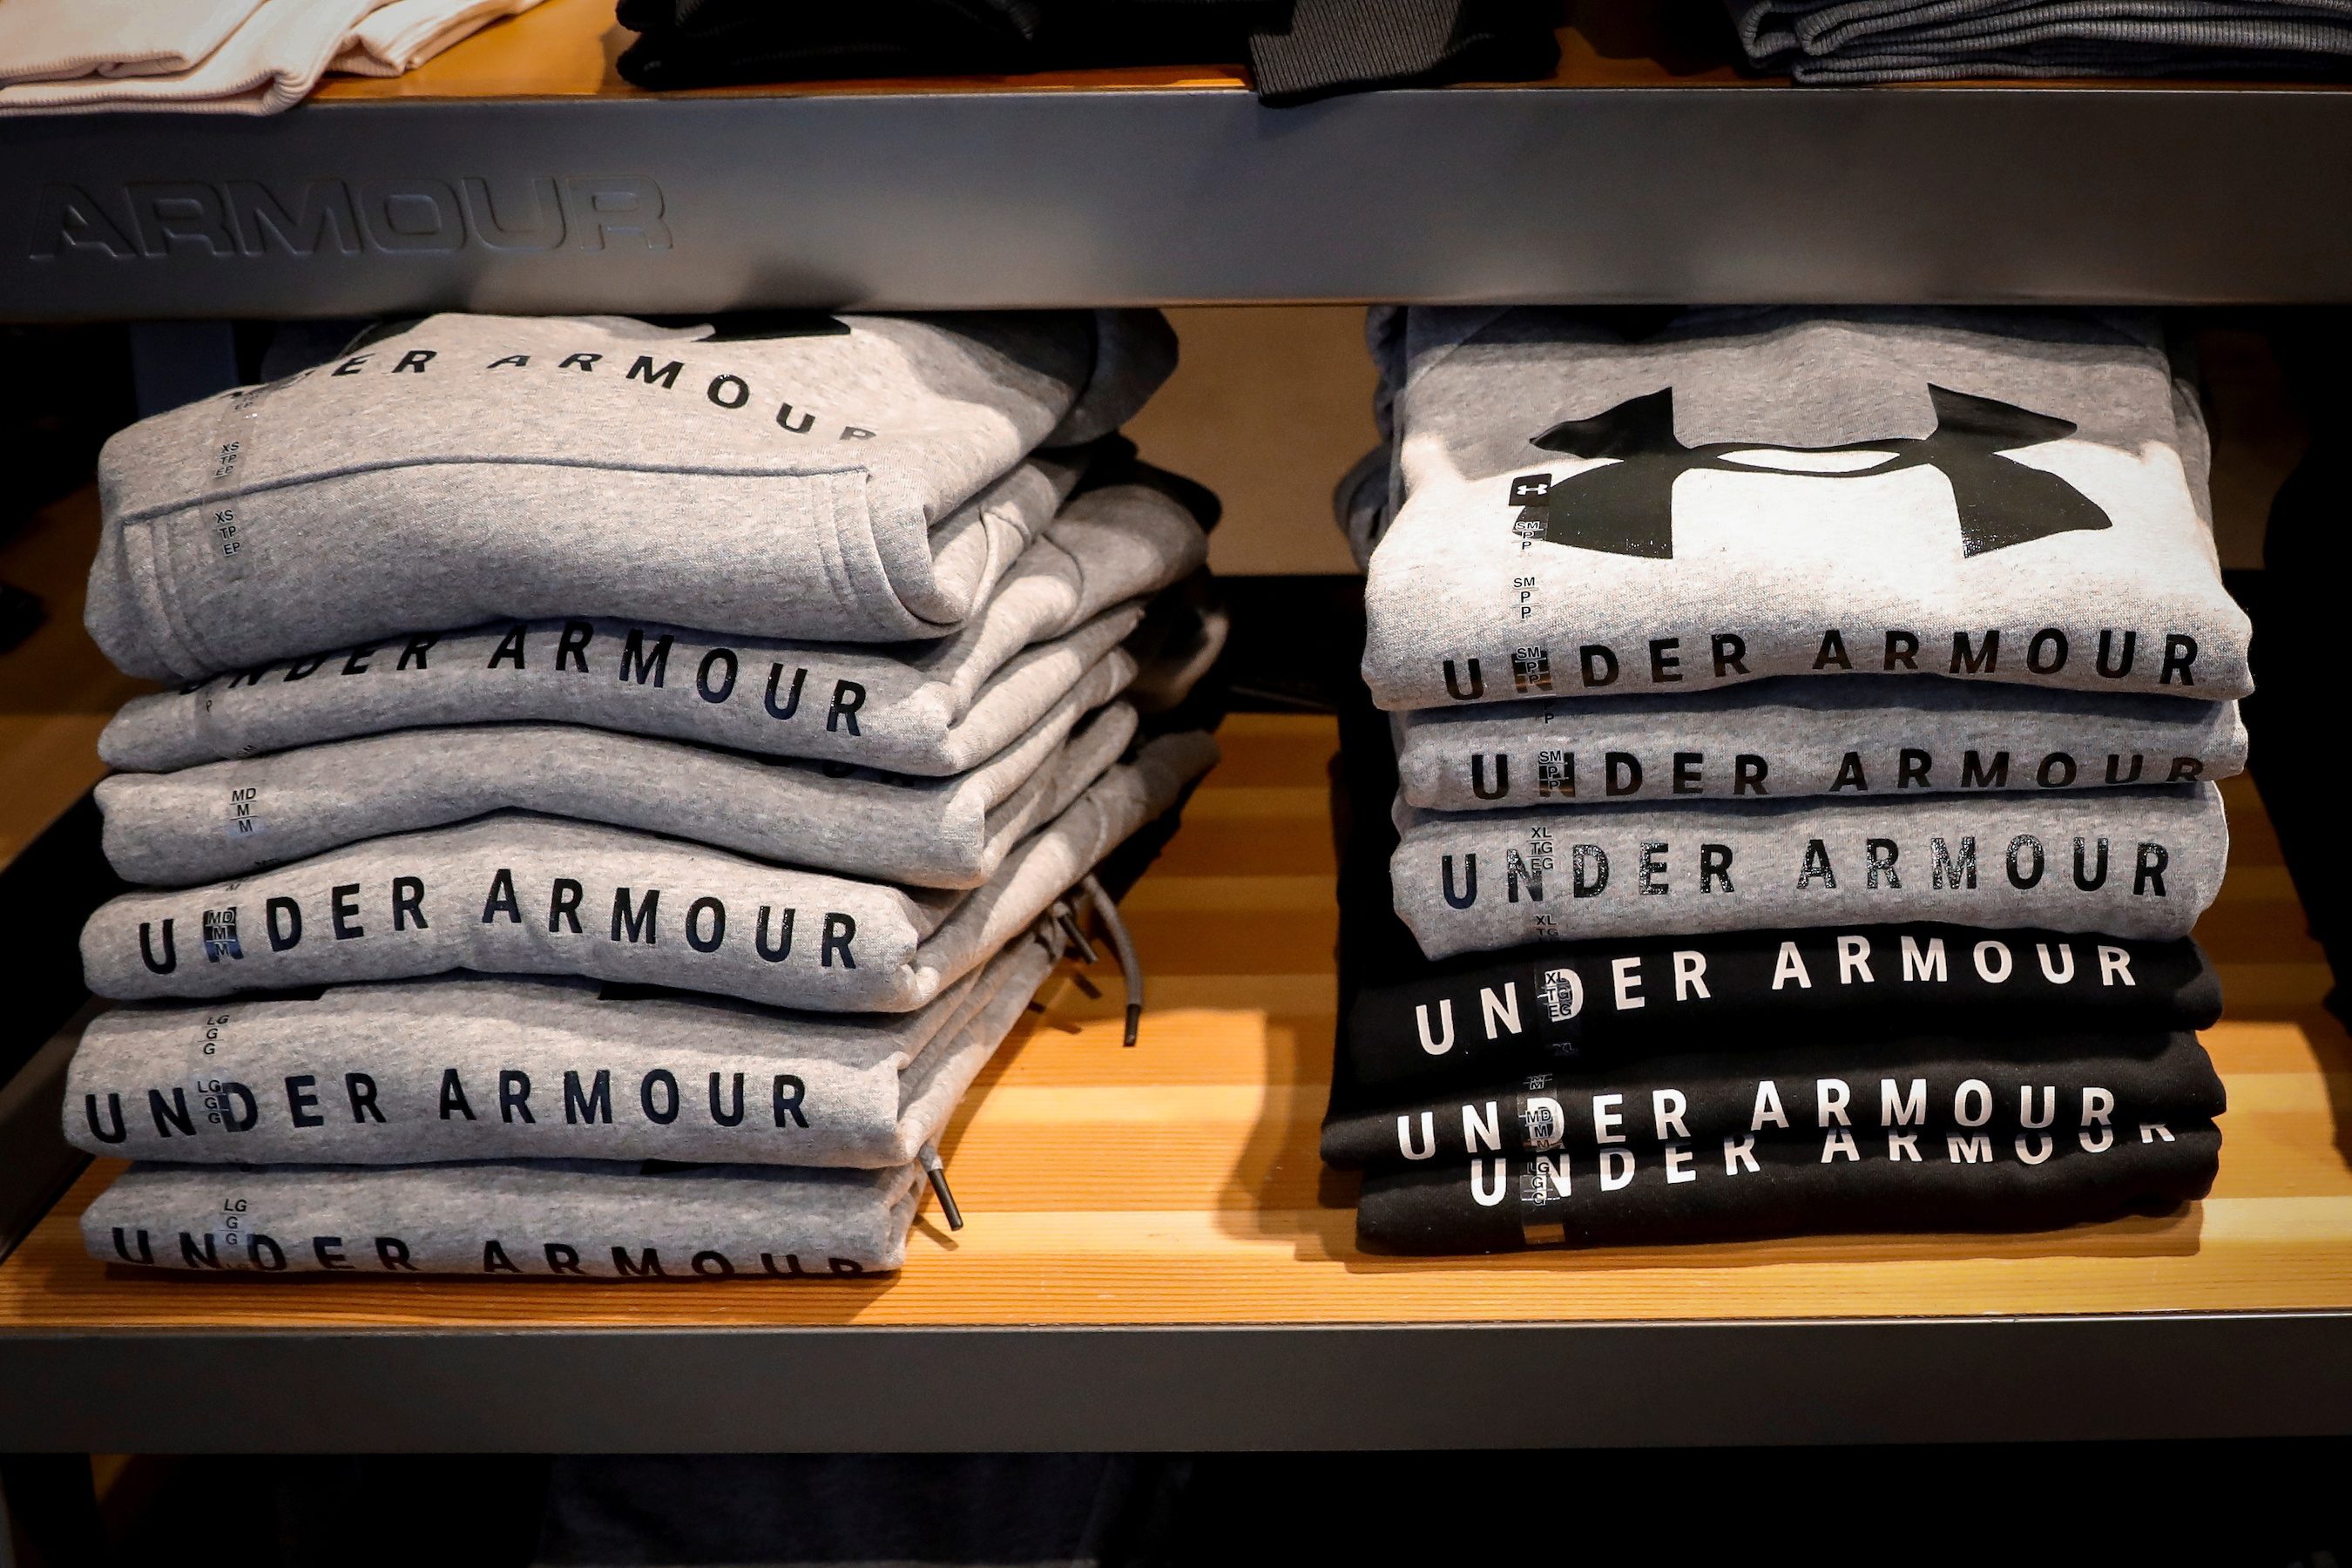 Under Armour to pay $9 million to settle US SEC charges